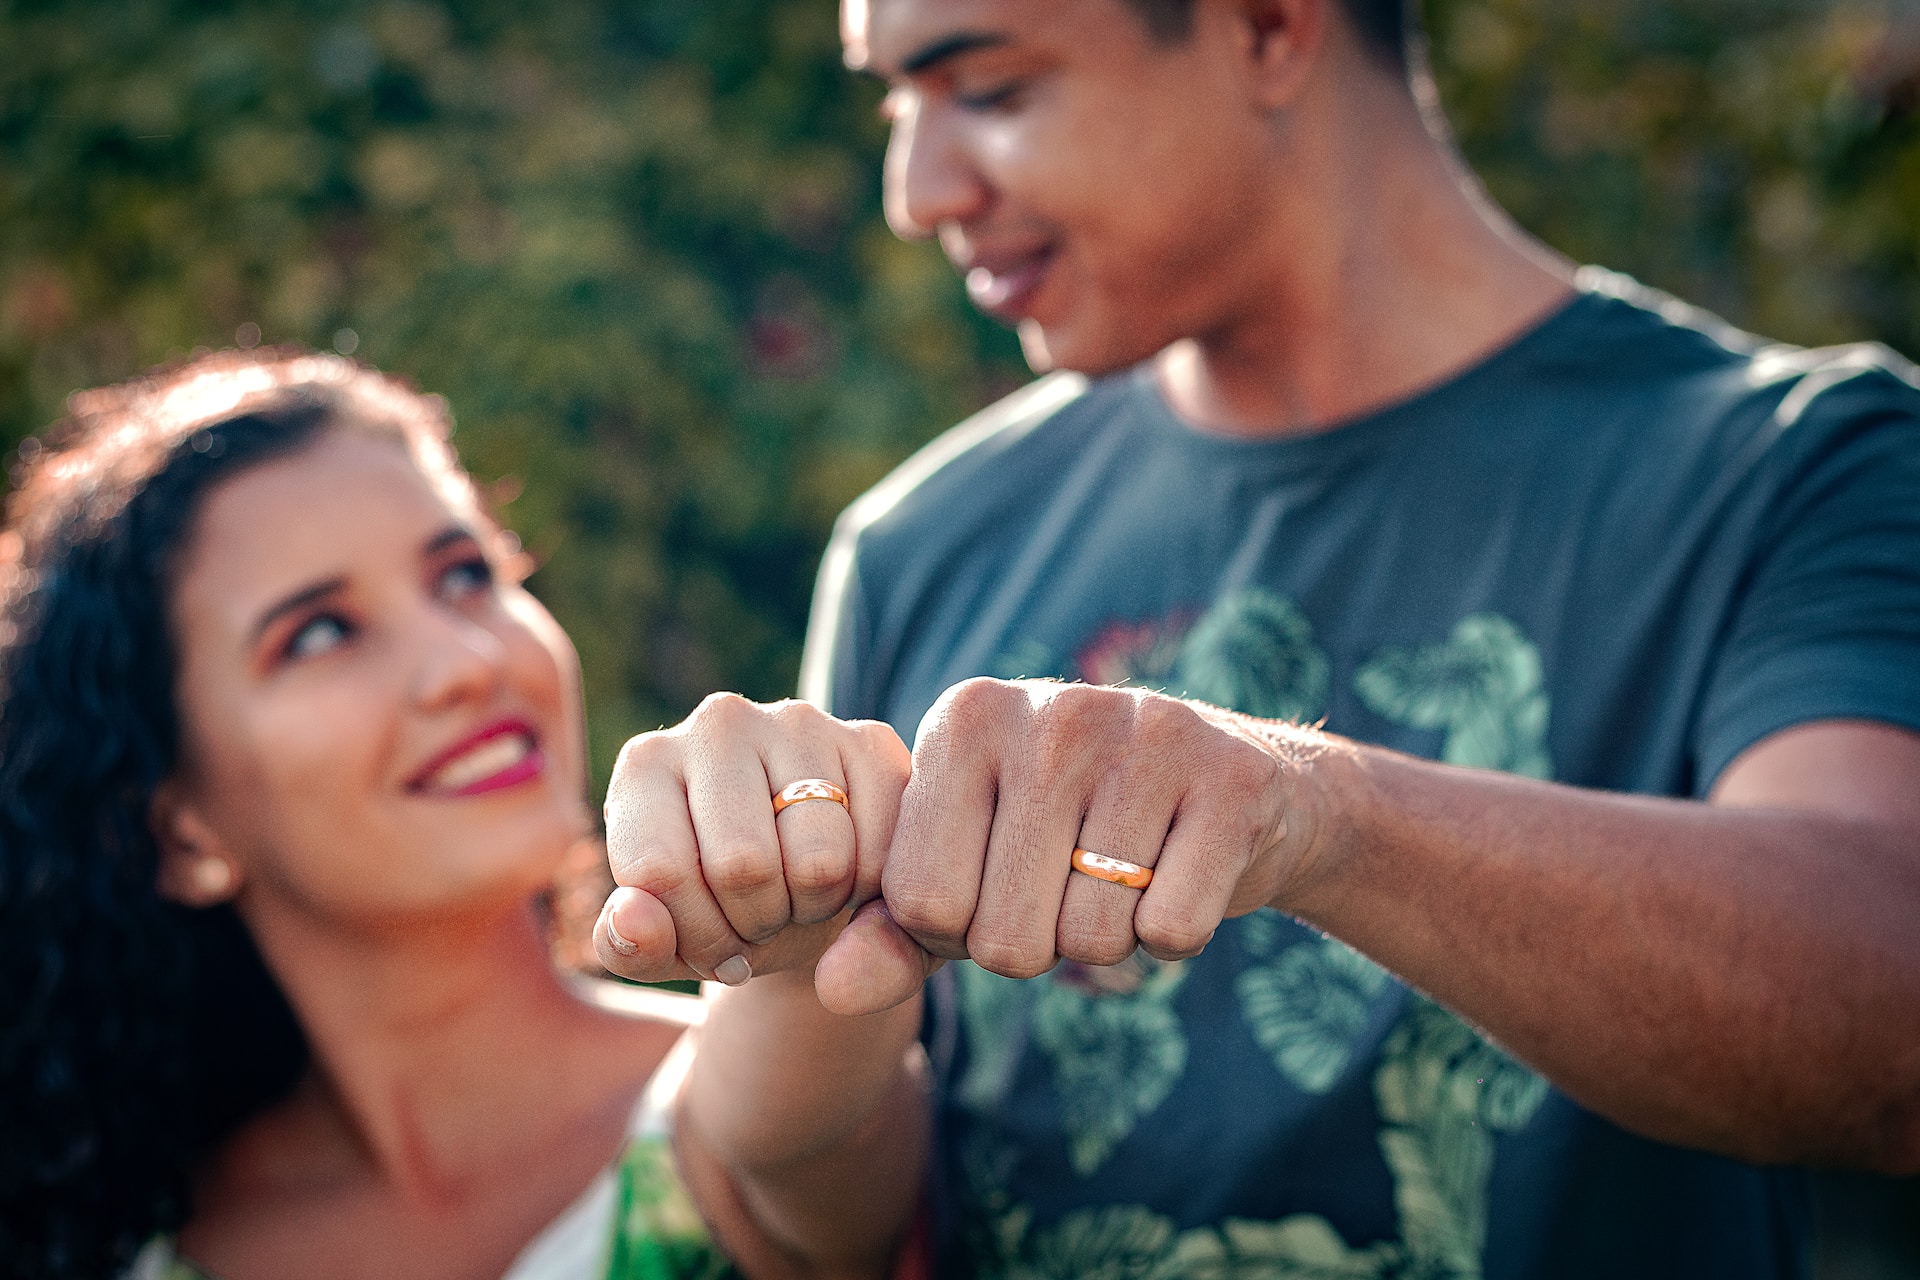 boyfriend and girlfriend showing ring on hand saying love messages for him